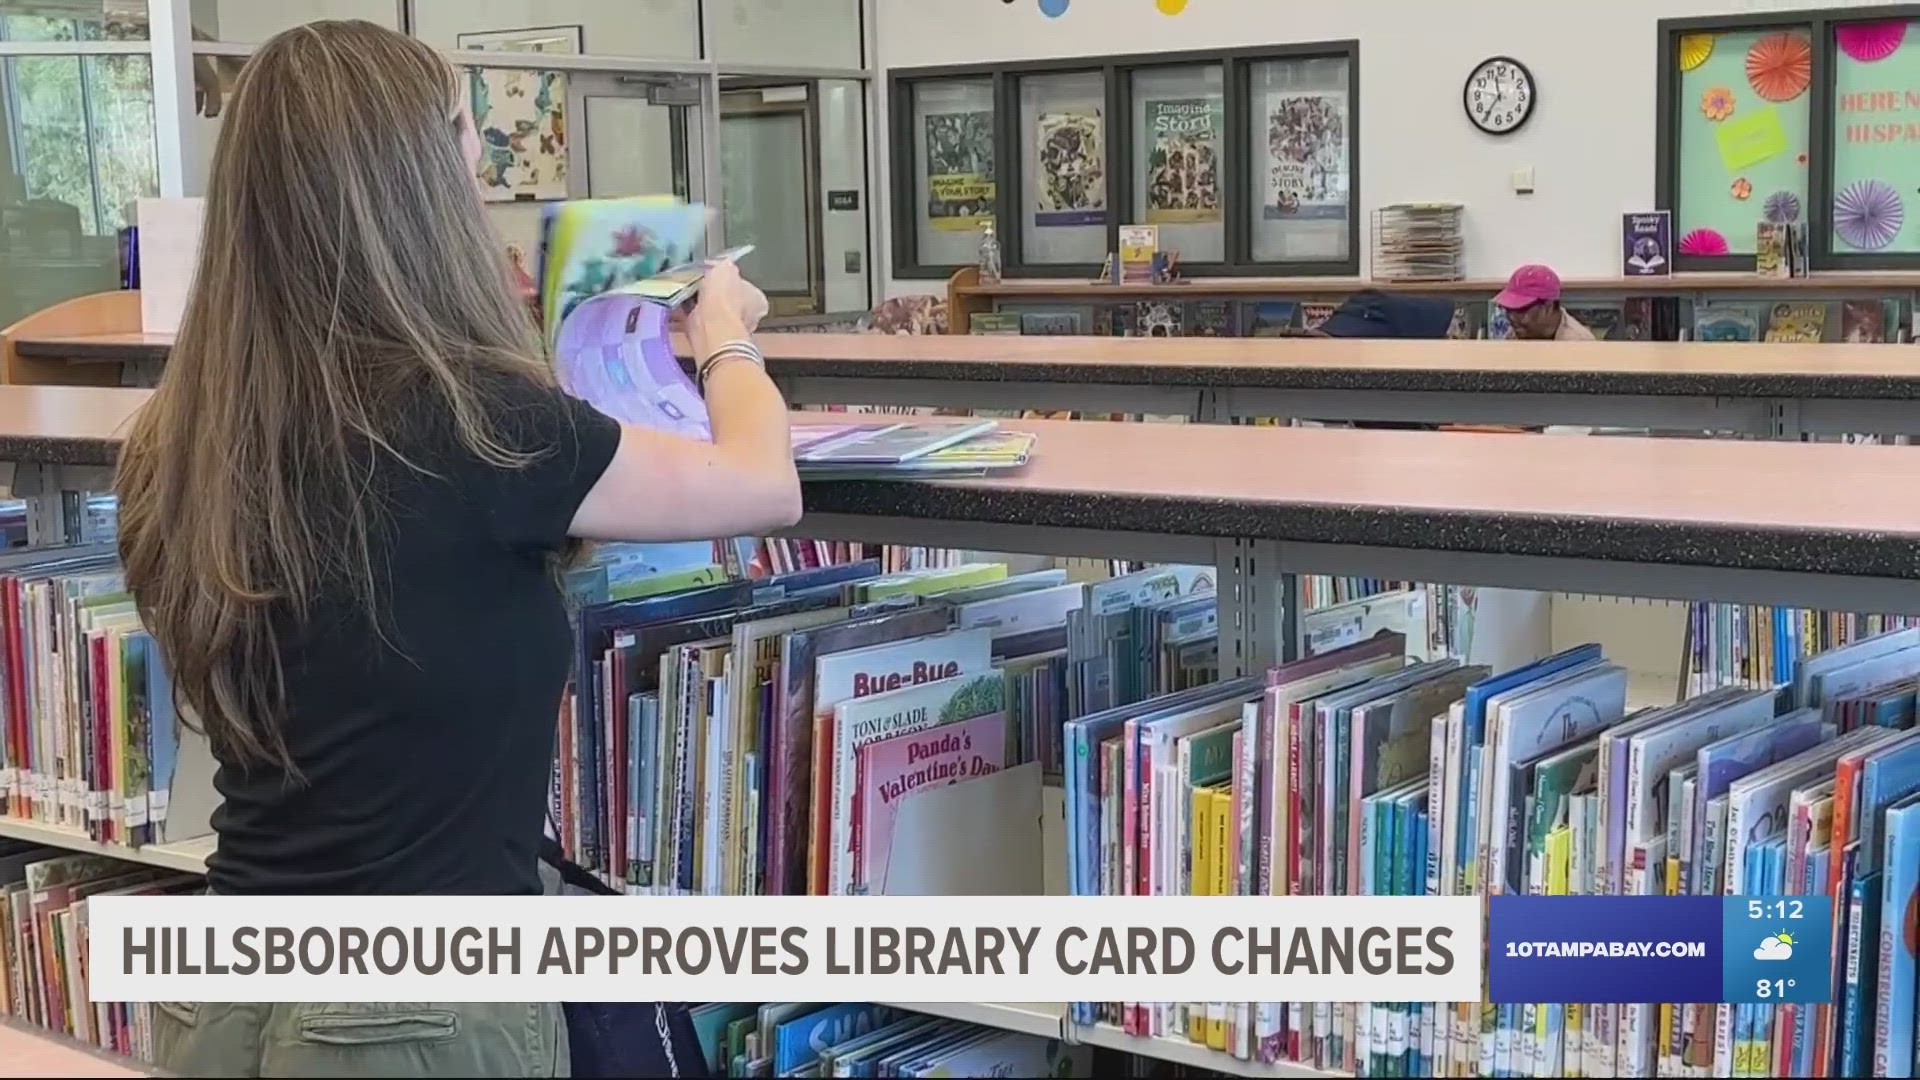 Leaders have cleared the way for a new library card system that will categorize access by age and then by levels within those age groups.